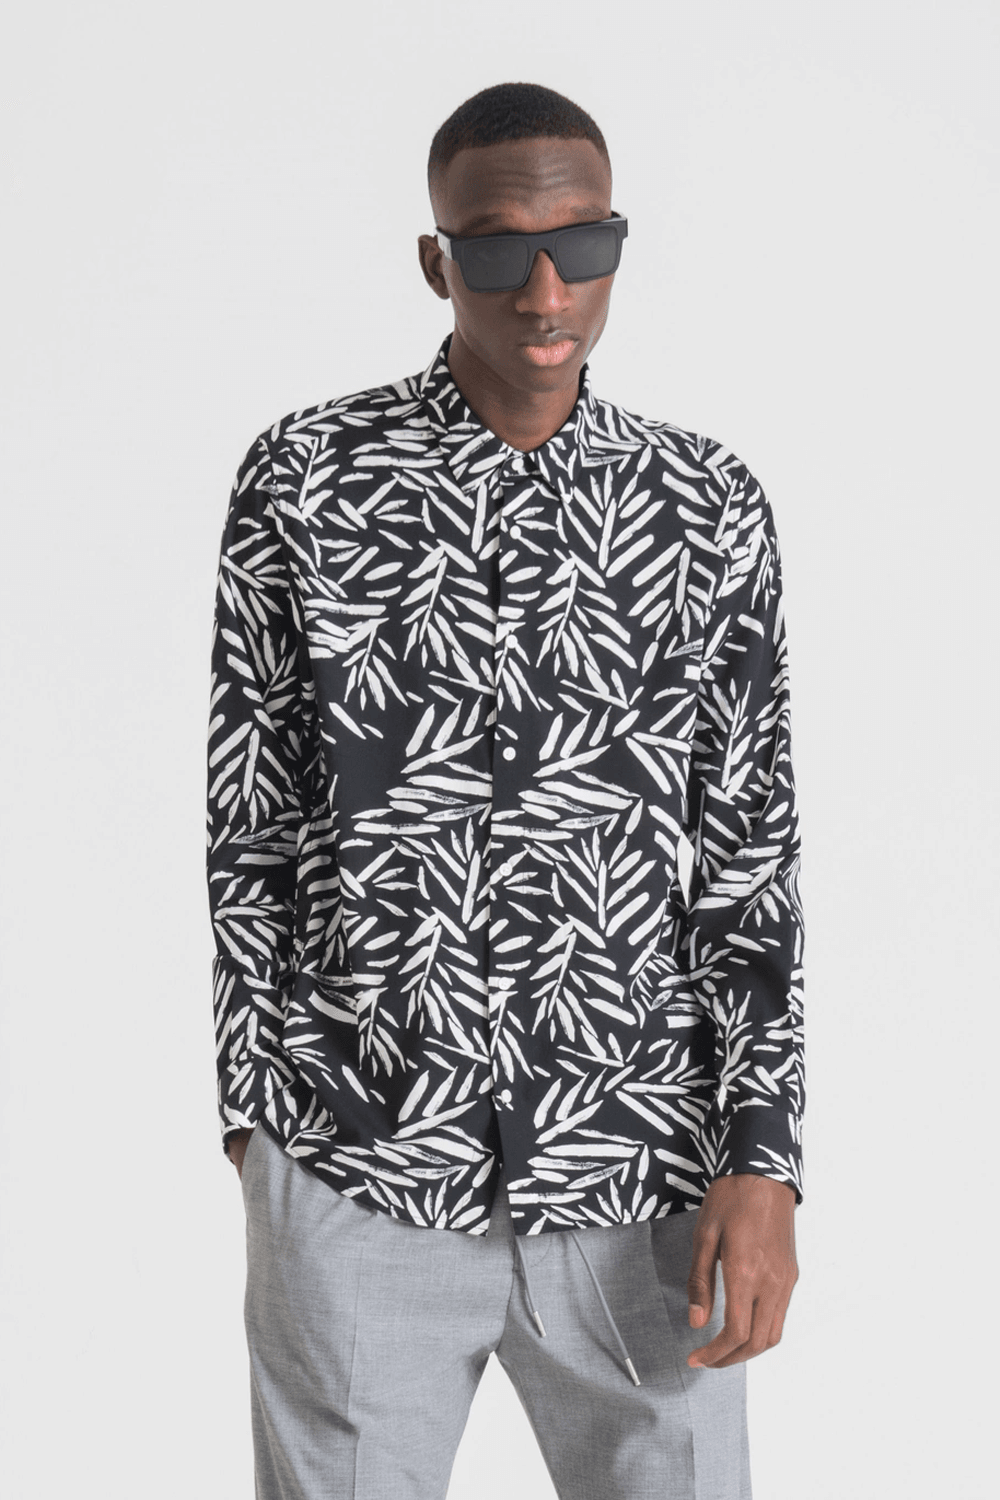 Buy the Antony Morato Barcelona Print Shirt in Black at Intro. Spend £50 for free UK delivery. Official stockists. We ship worldwide.